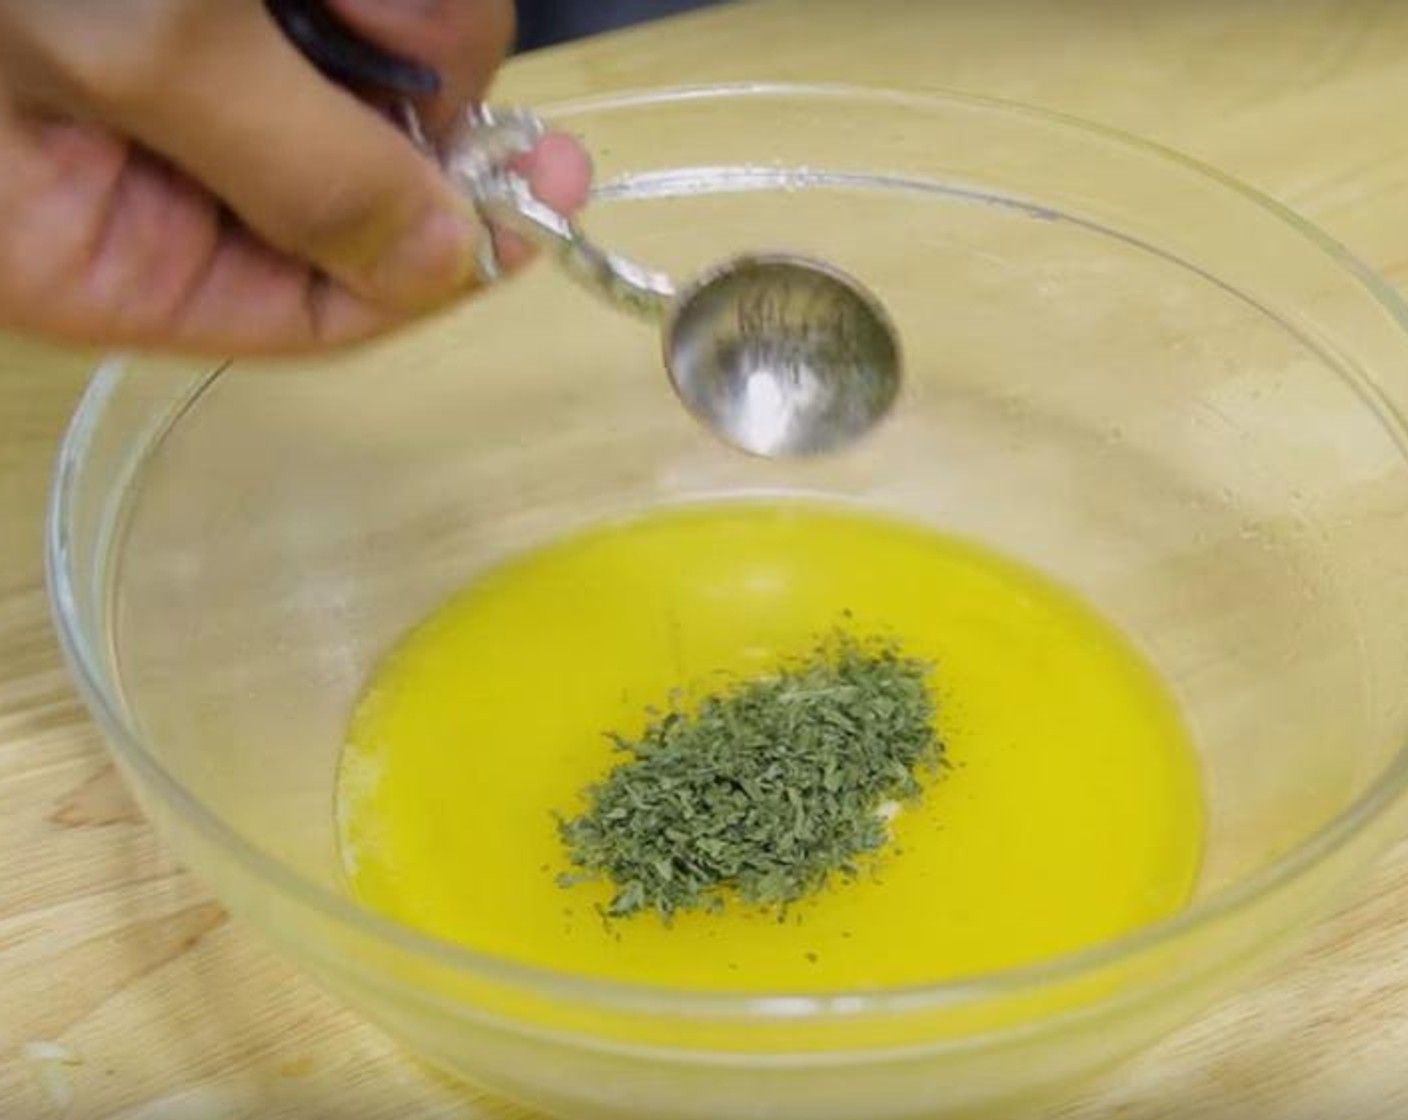 step 3 For the butter mixture topping: In a bowl, put Butter (1/2 stick), then add Garlic (2 cloves), McCormick® Garlic Powder (1/2 tsp) and Dried Parsley (1 tsp). Mix together until combined.